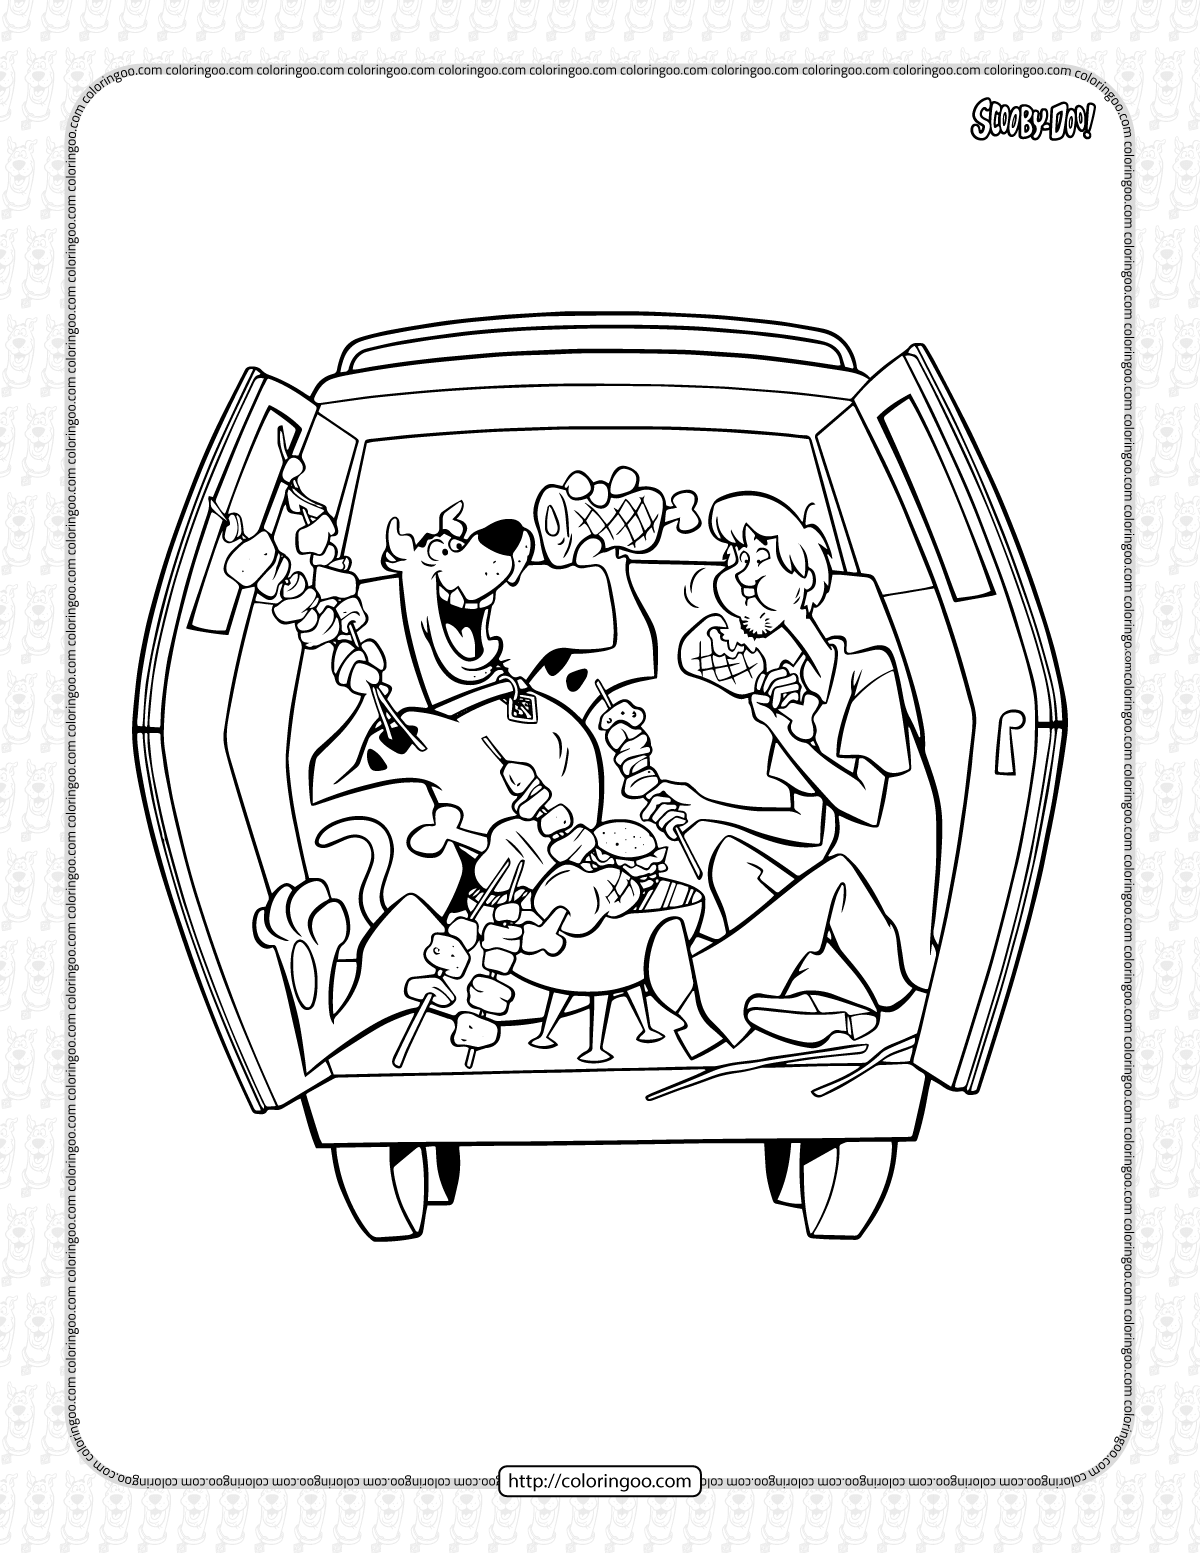 Scooby-Doo and Shaggy Coloring Page for Kids